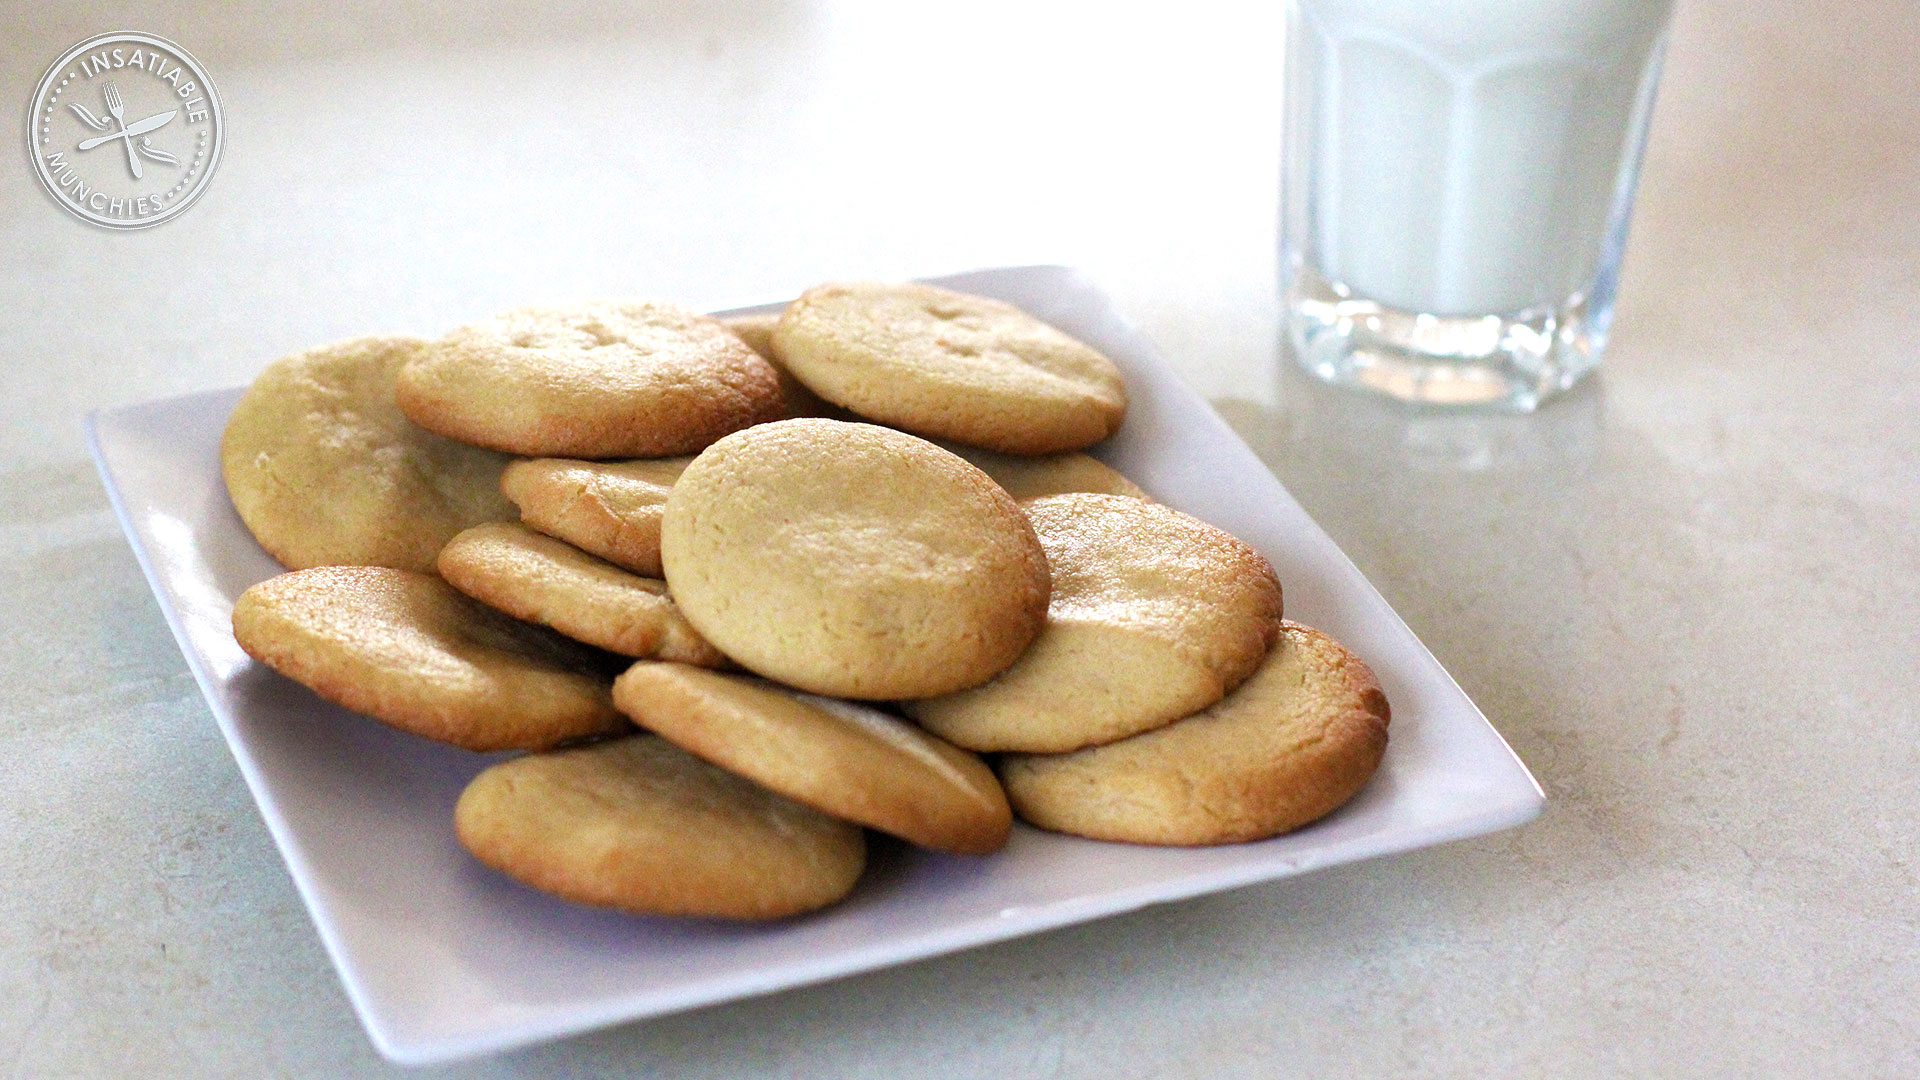 Plate of cookies, with milk